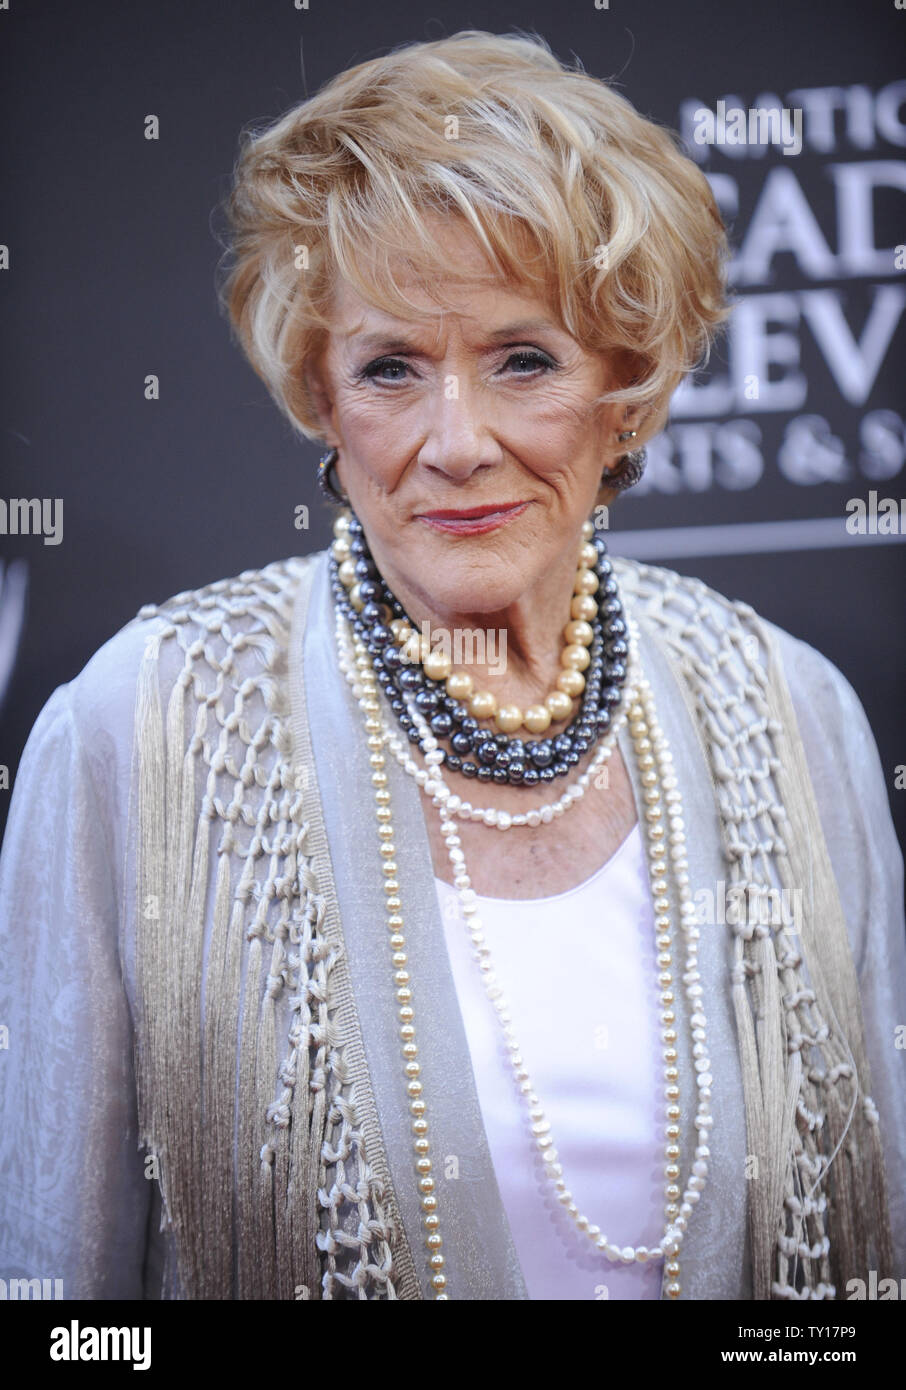 Jeanne Cooper attends the 36th Annual Daytime Emmy .Awards in Los Angeles on August 30, 2009.      UPI/ Phil McCarten Stock Photo